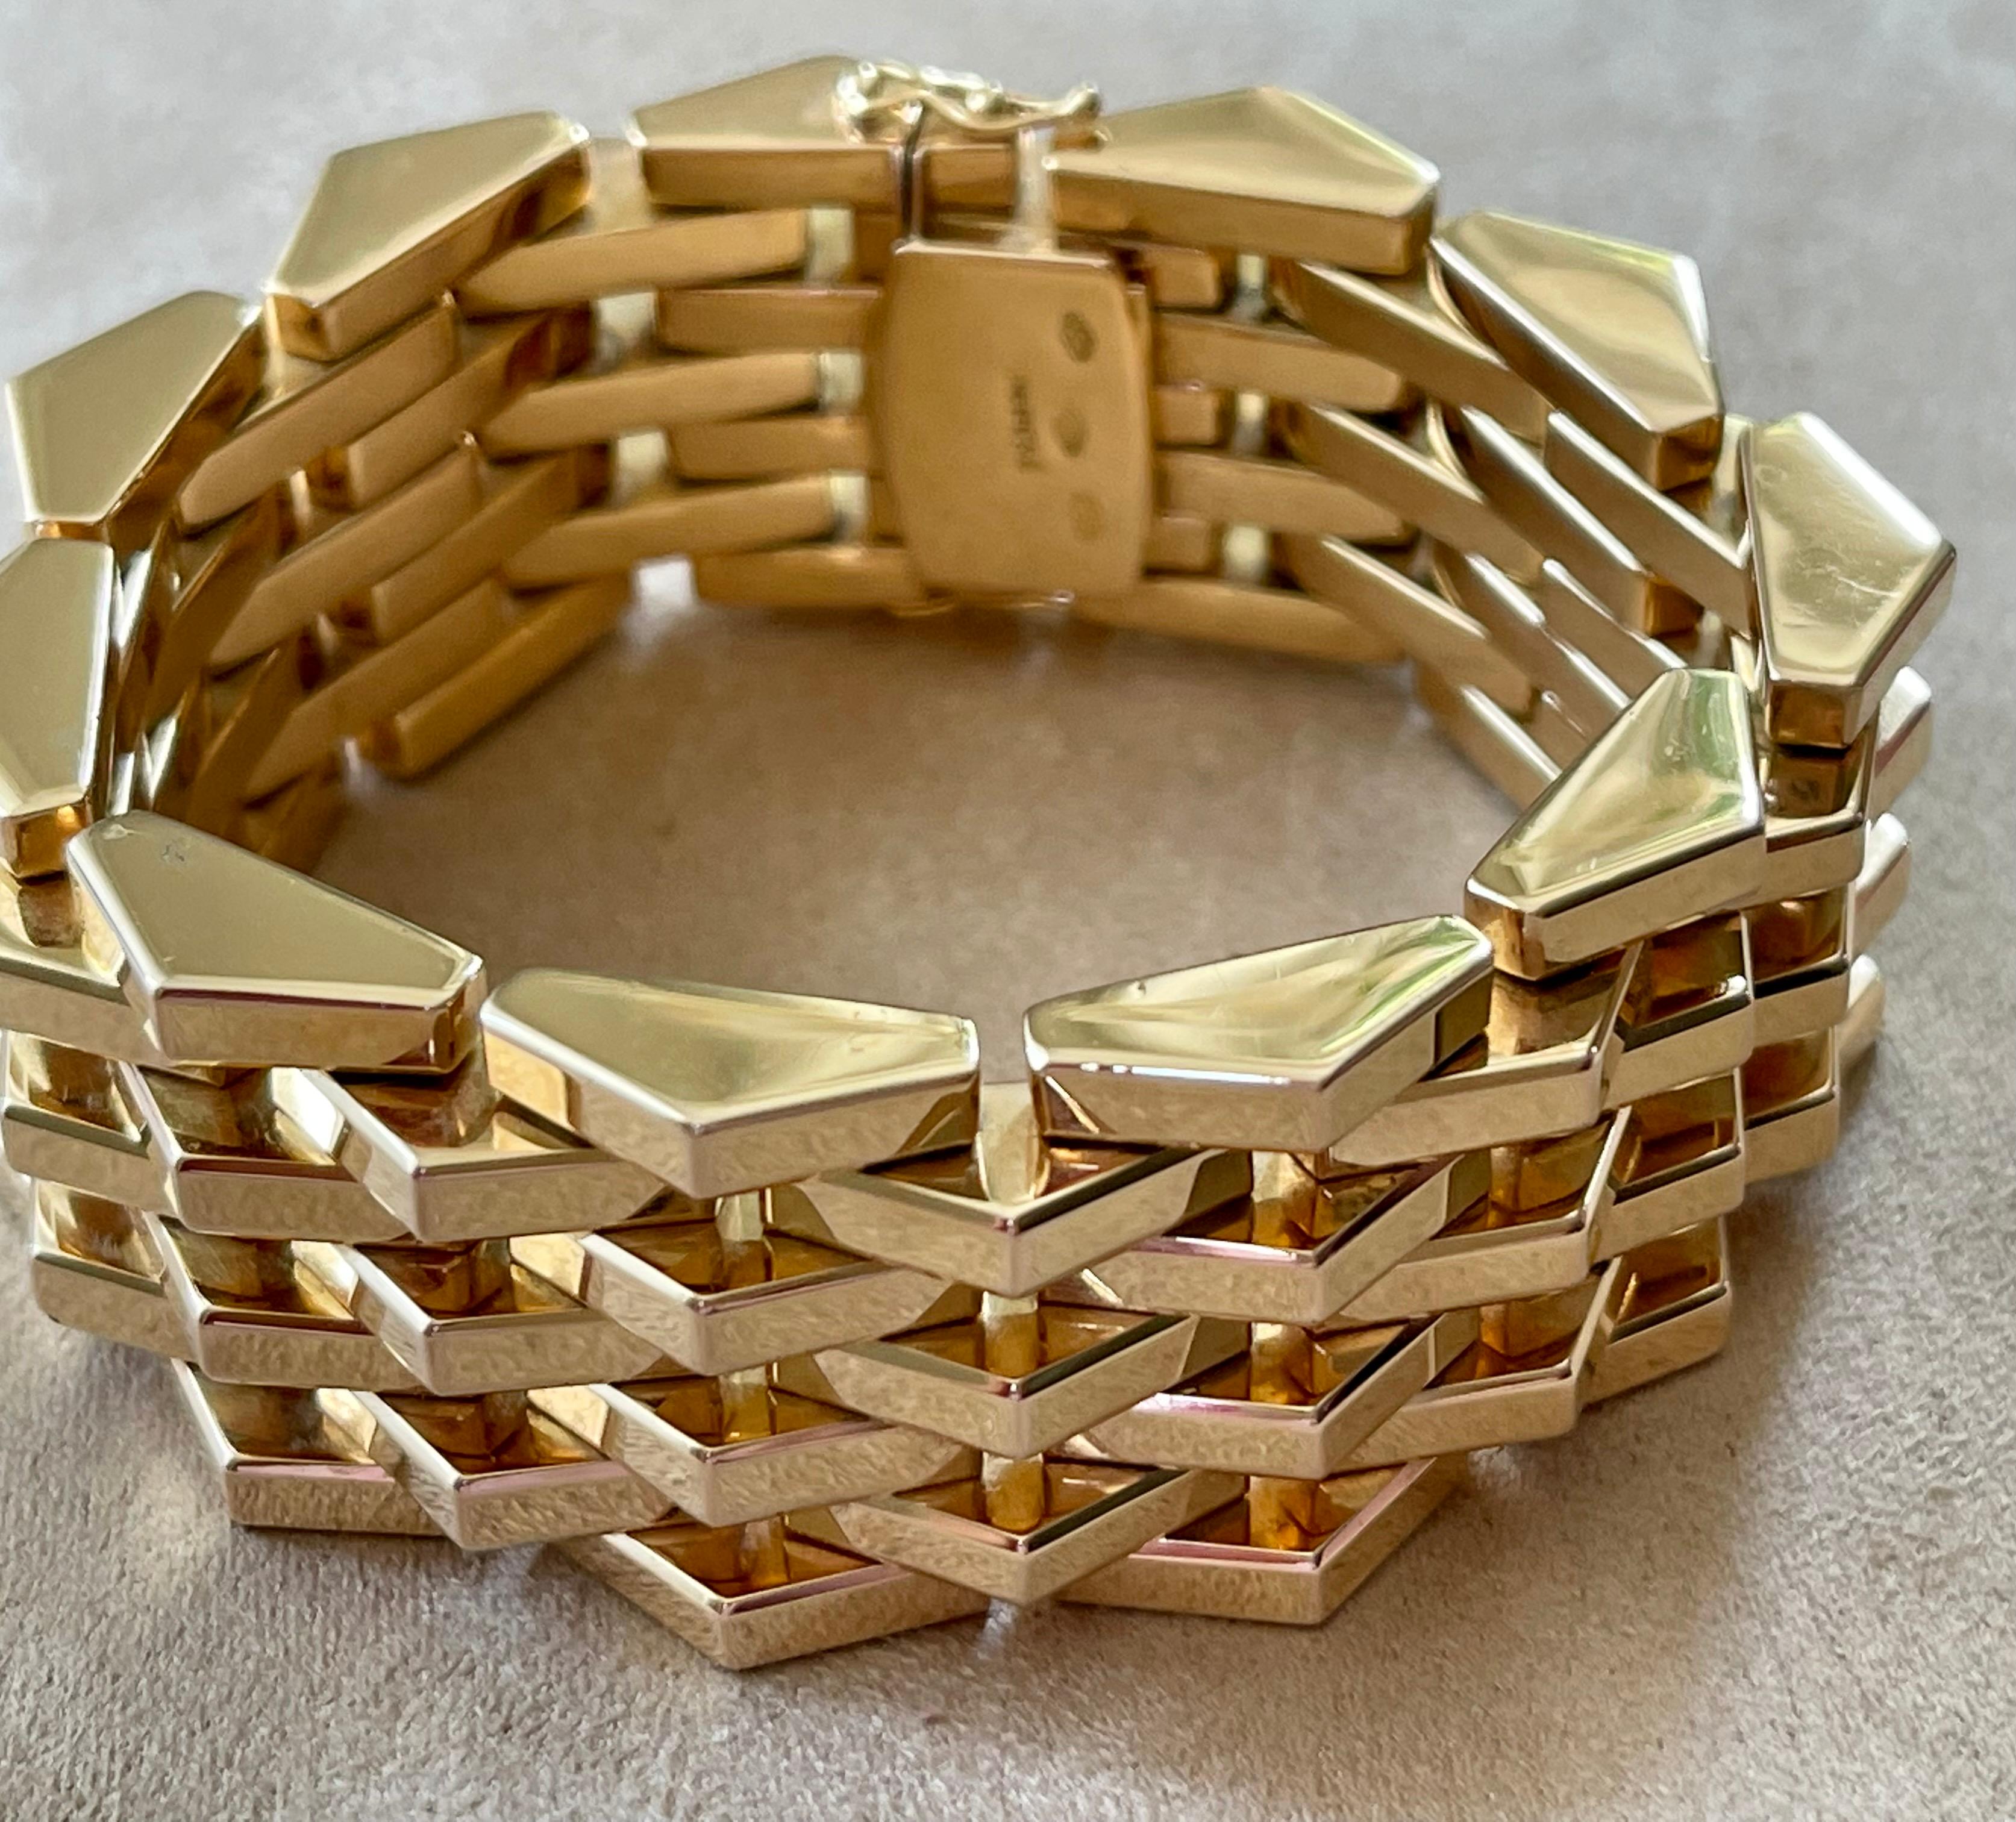 This splendid six row tank style bracelet is composed of large articulated geometric motifs each domed on the front. The clasp of this antique gold bracelet is a ratchet with a safety 8 feature.
Length: 17.5 cm, Width at widest point: 2.3 cm,